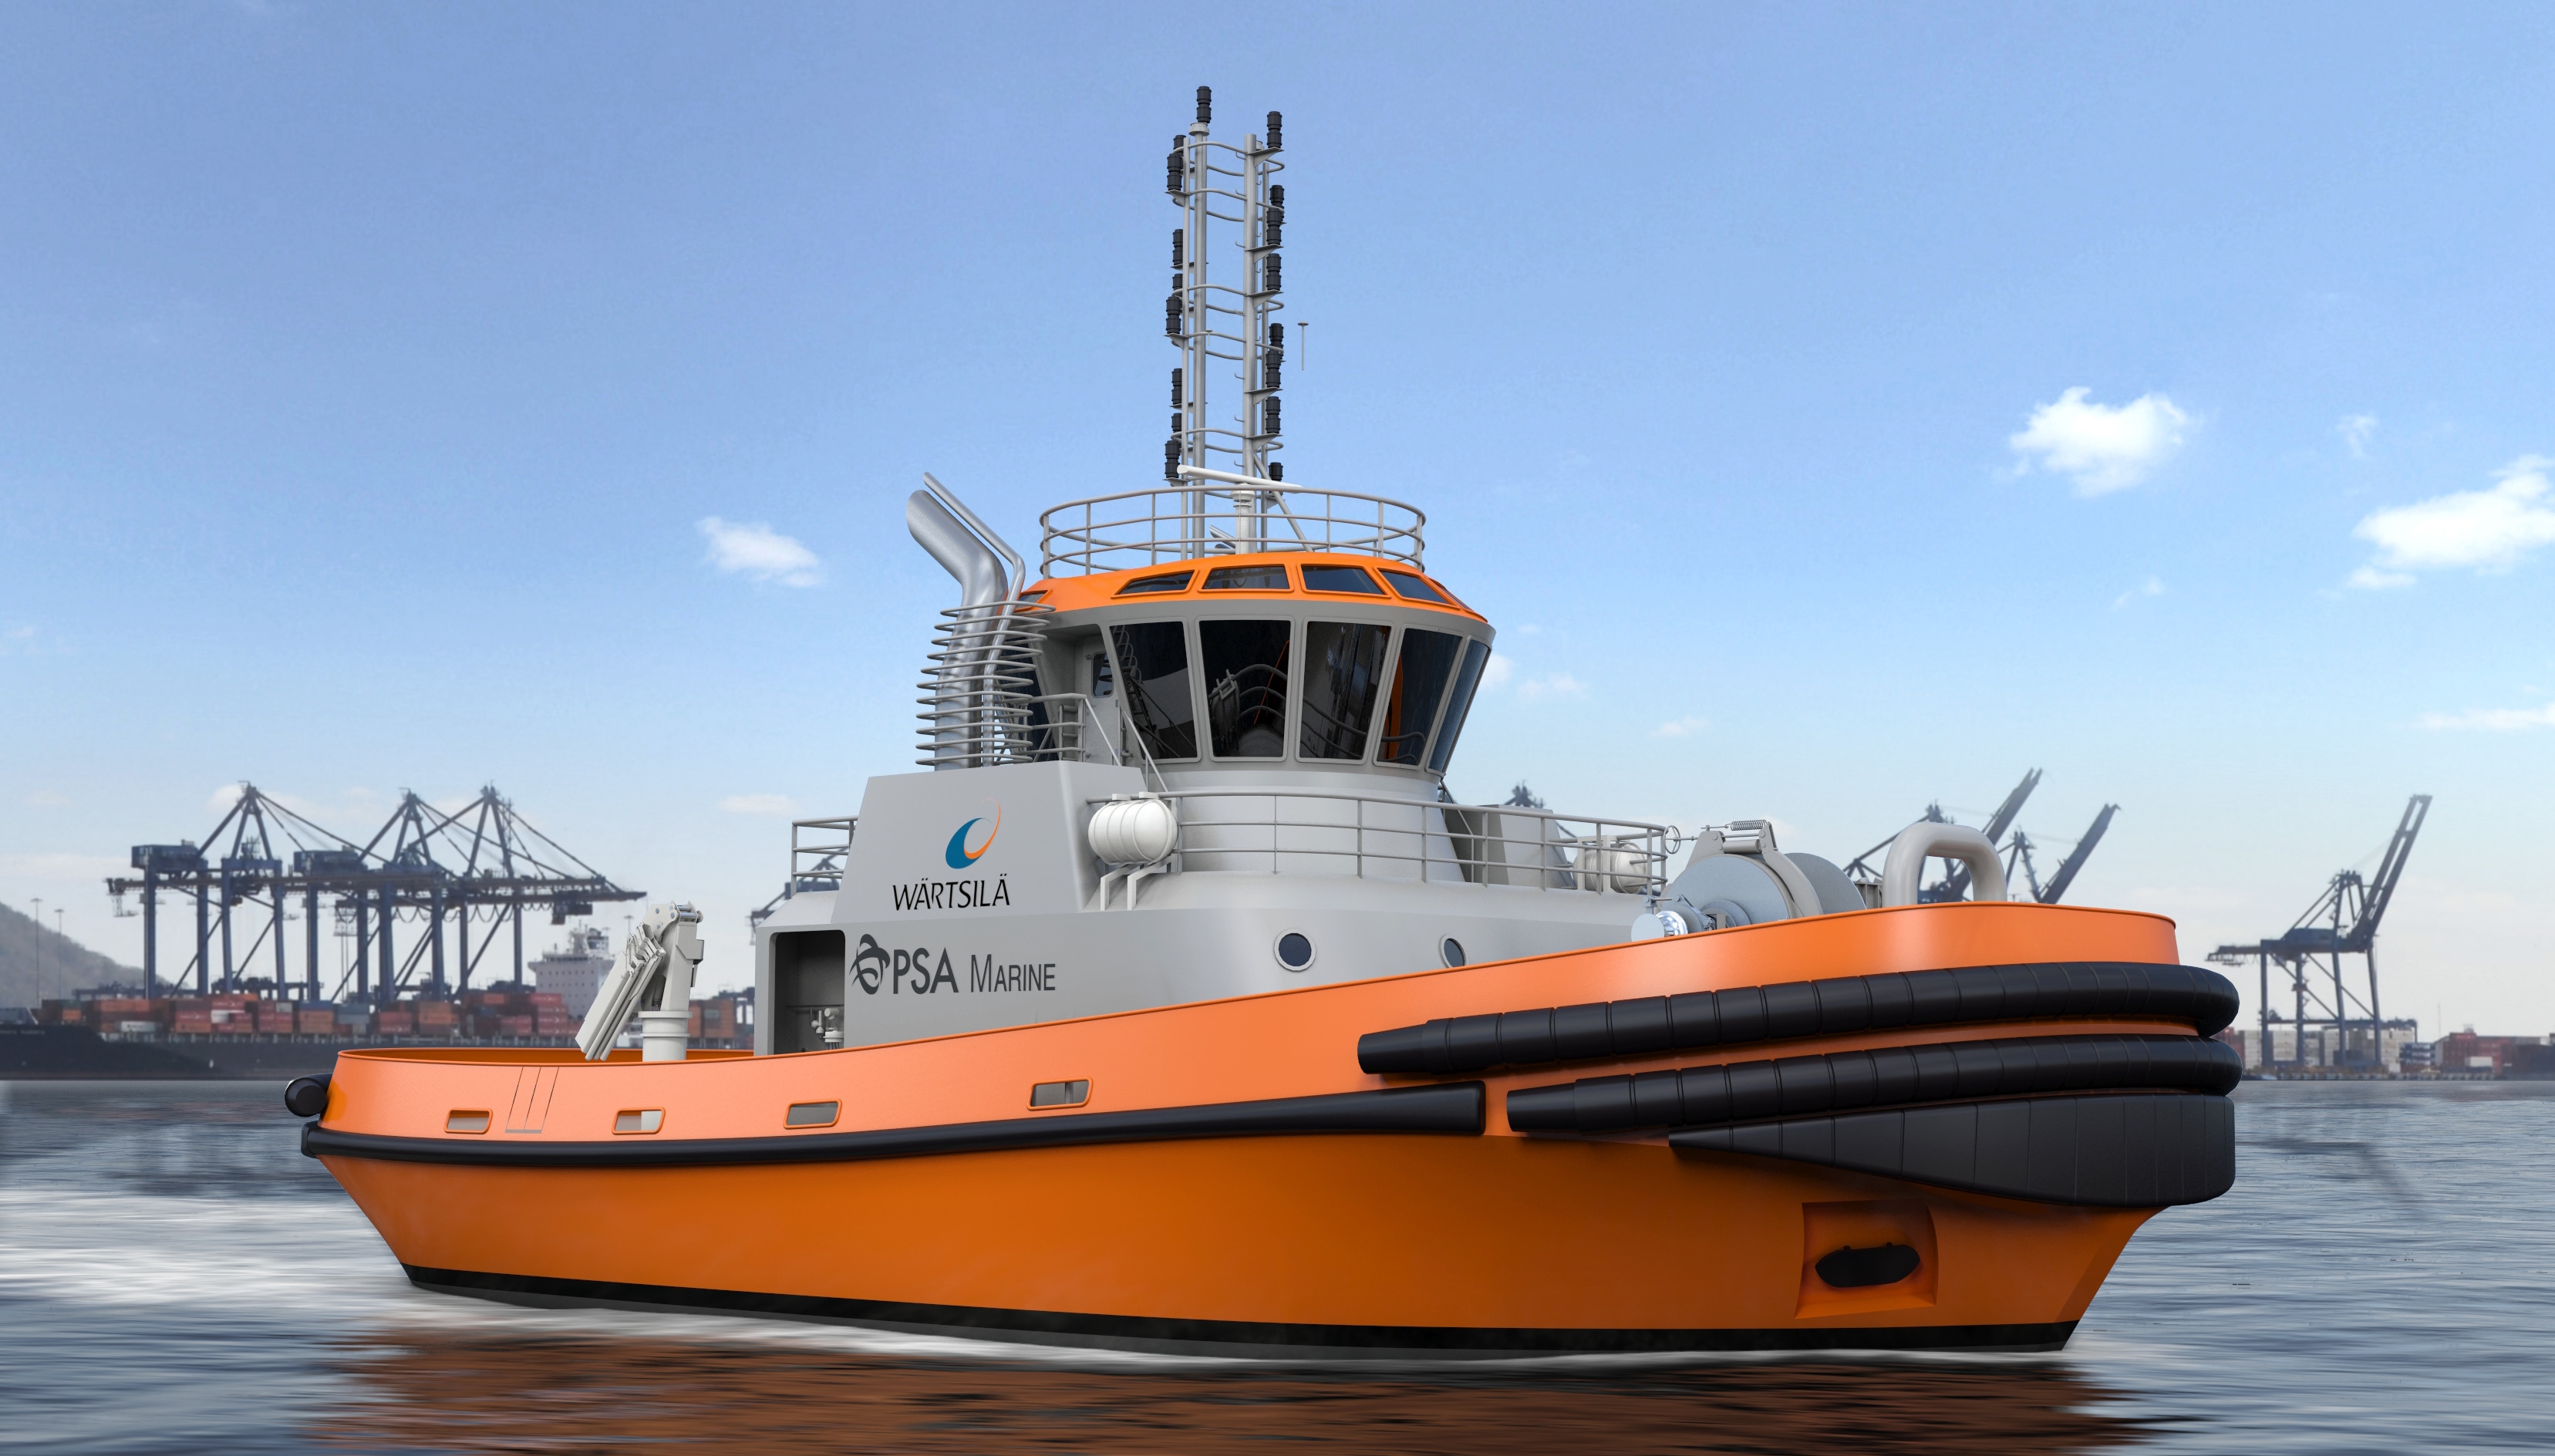 Wartsila to design and equip PSA Marine's LNG-fueled tug